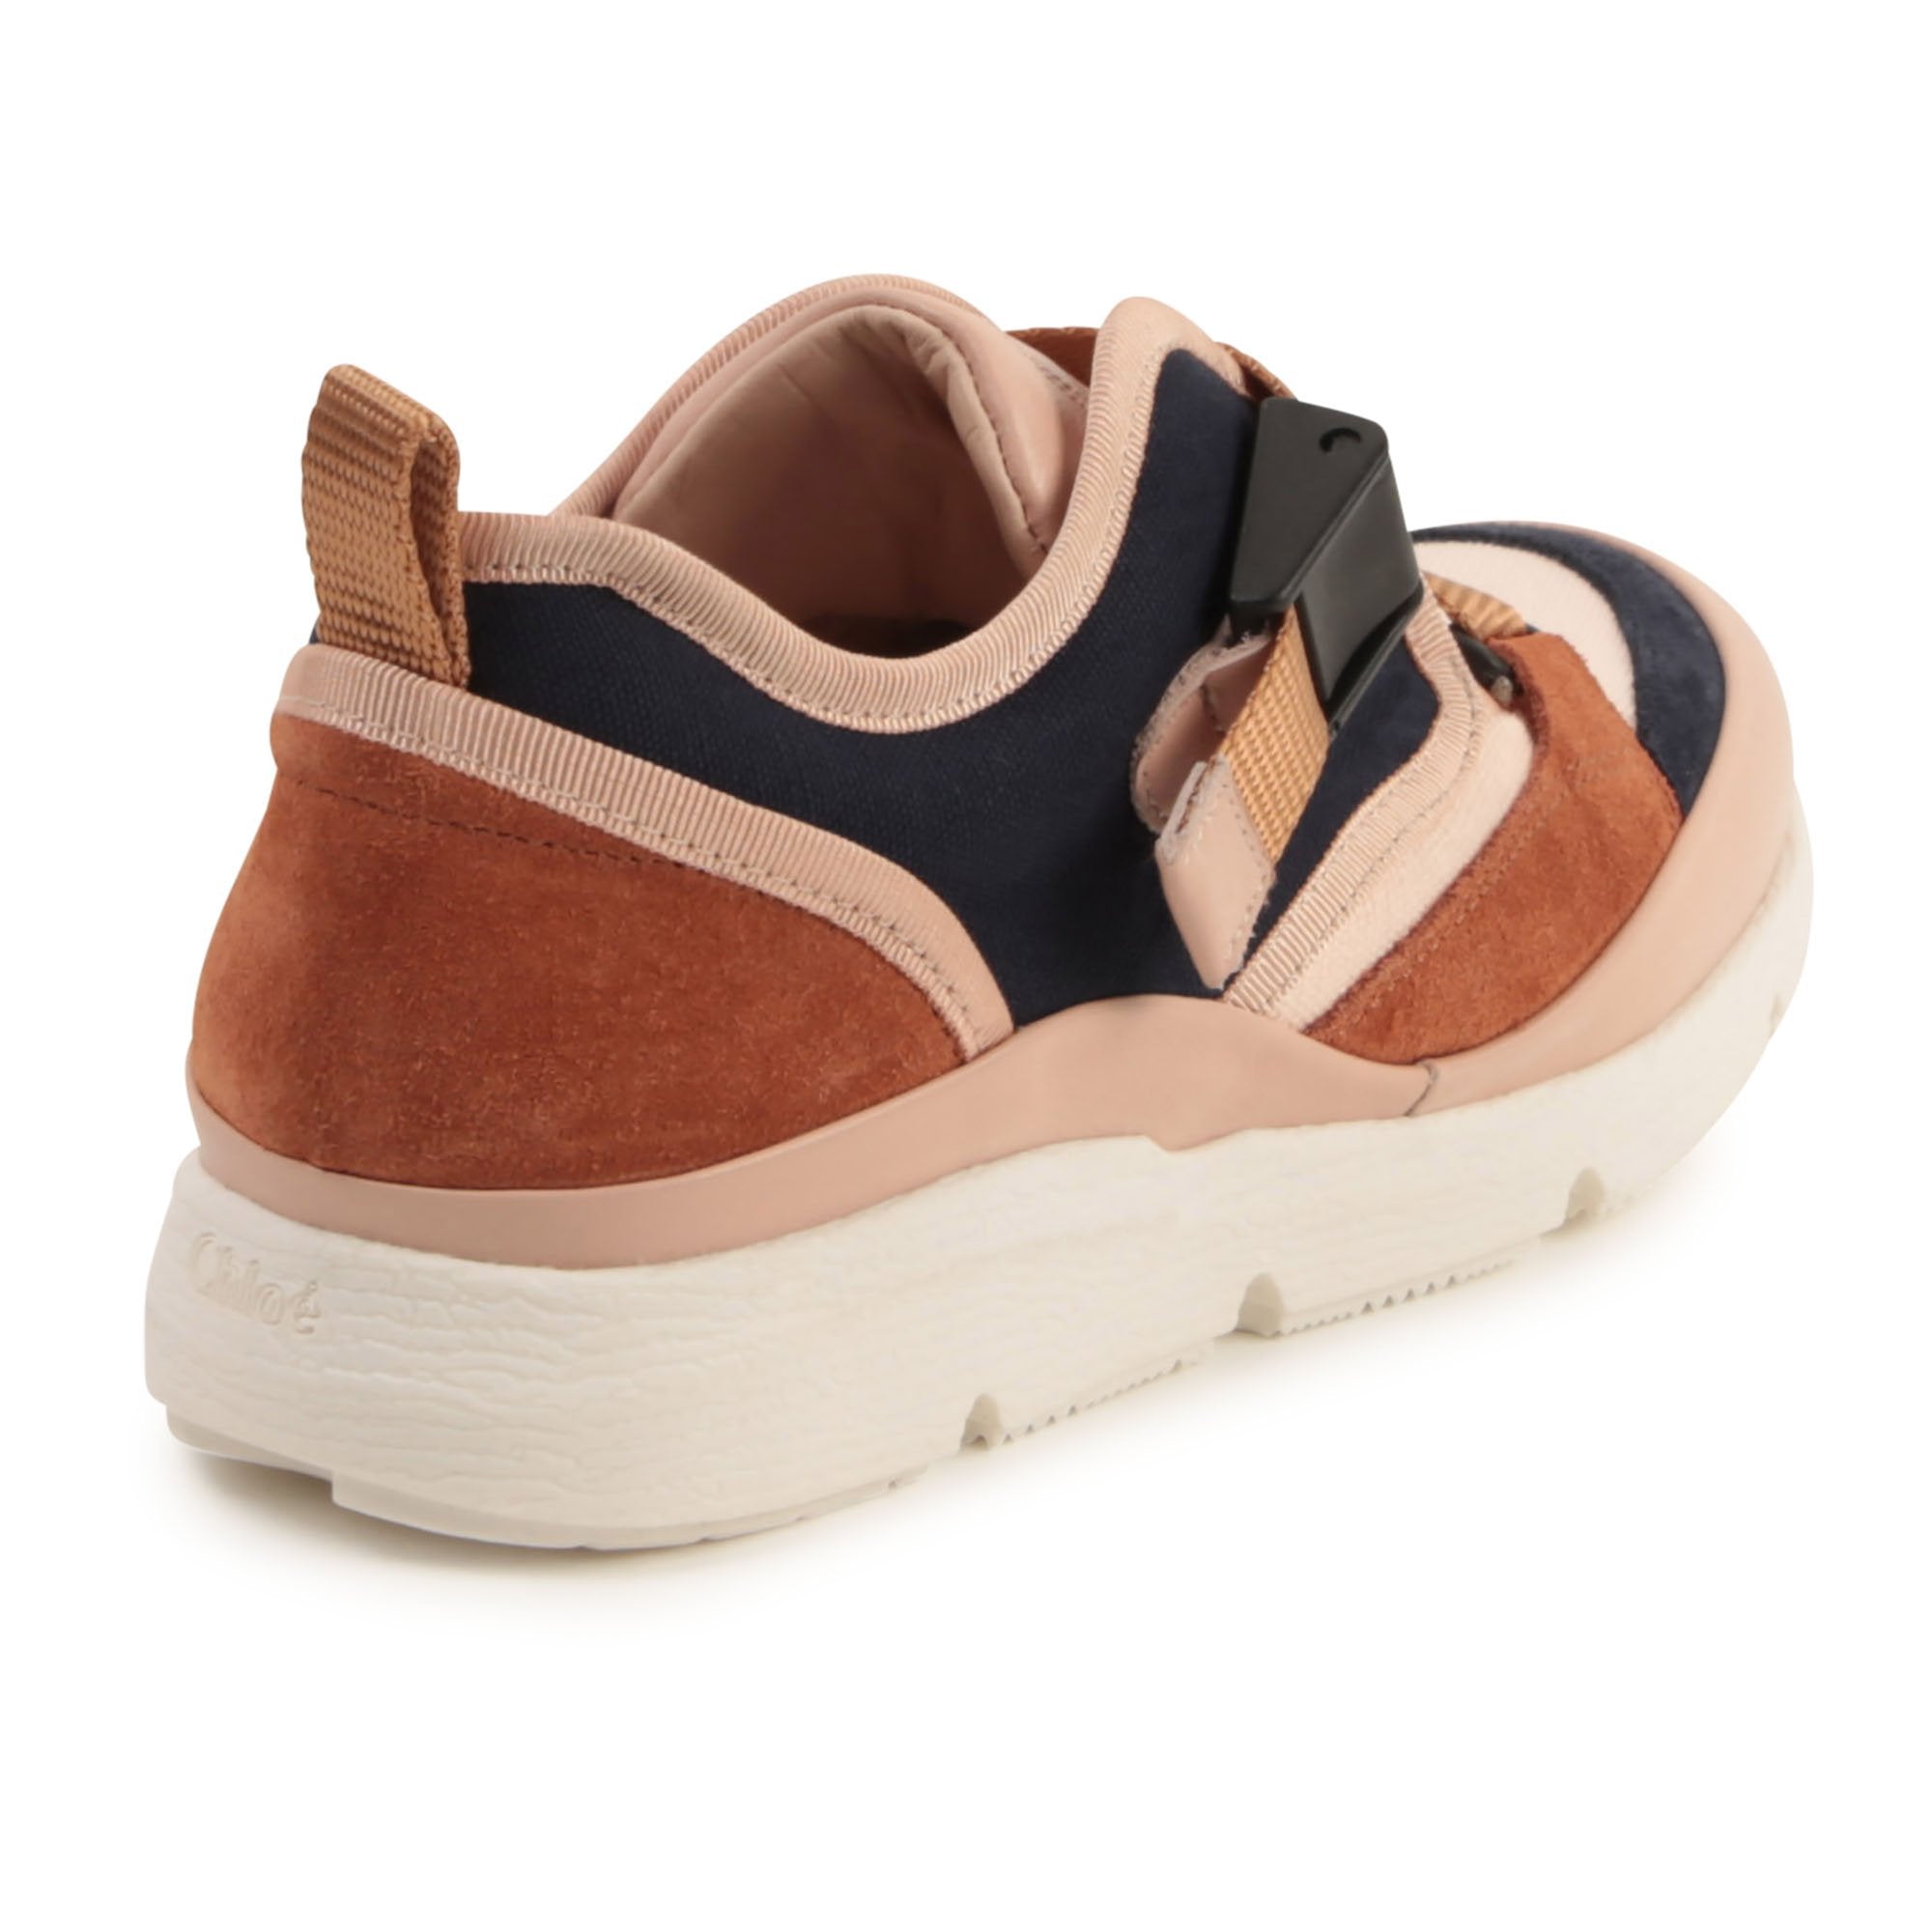 Chloe Girls Leather Trainers Pink